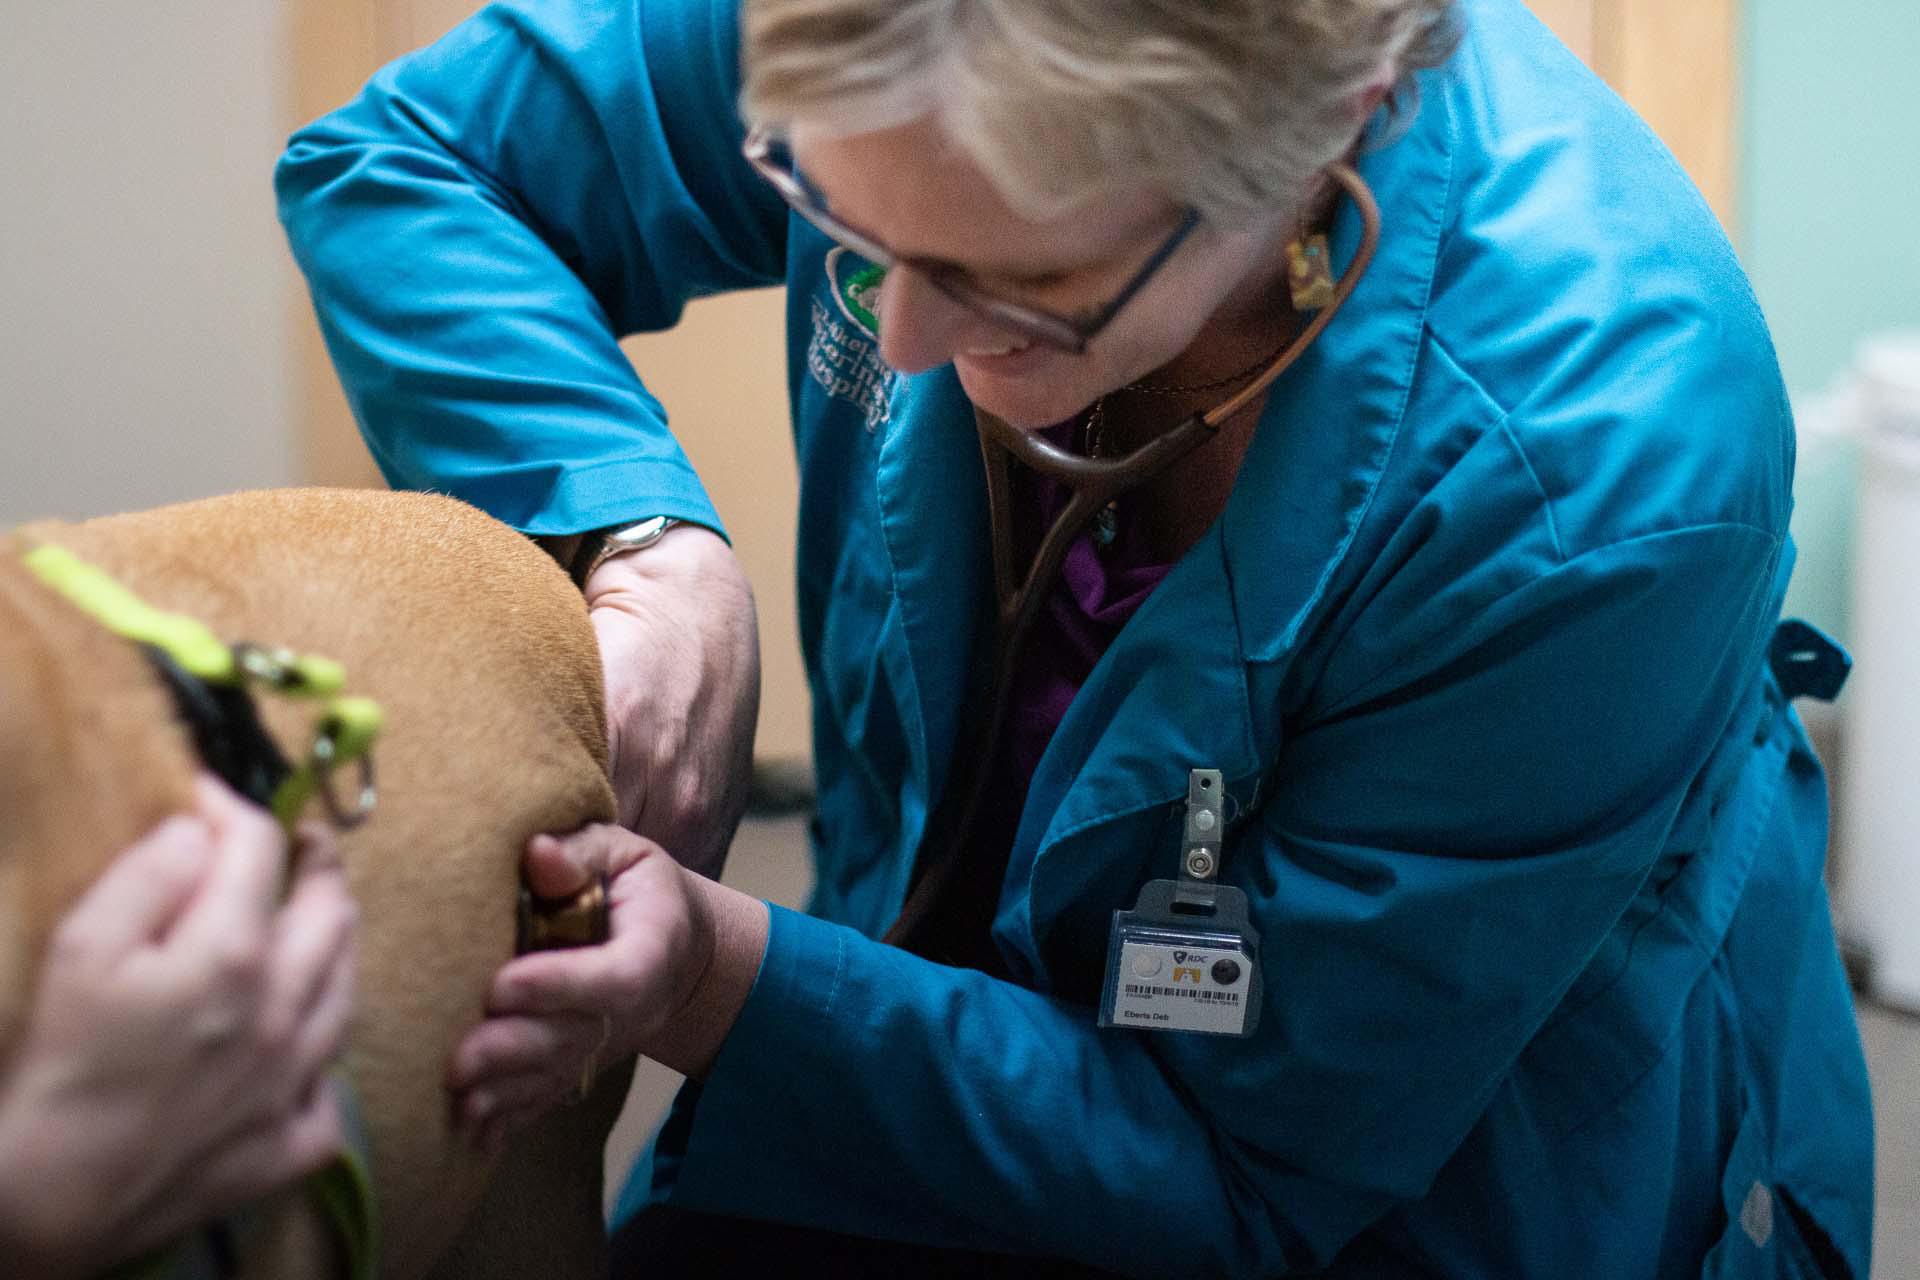 Dr. Piepgras uses a stethoscope to listen to a patient’s heart and lungs, which is also part of our  Lakeland Veterinary Hospital Baxter (218)829-1709